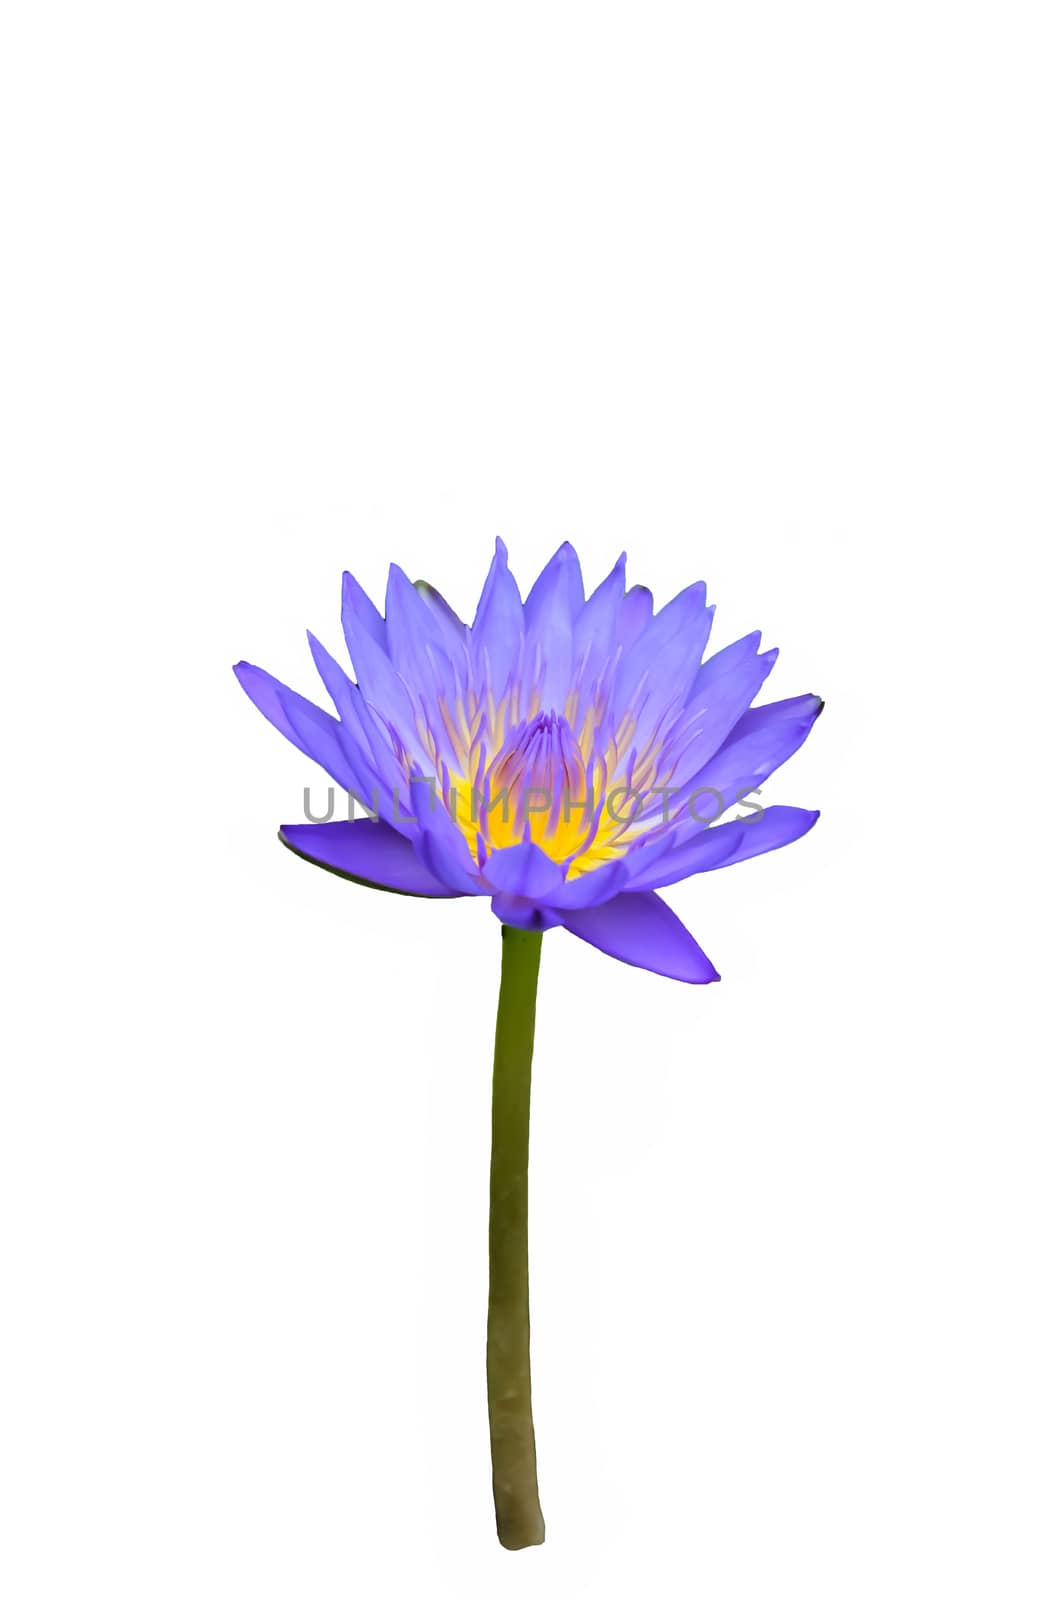 Beautiful water lily, Purple lotus flower isolate on white background